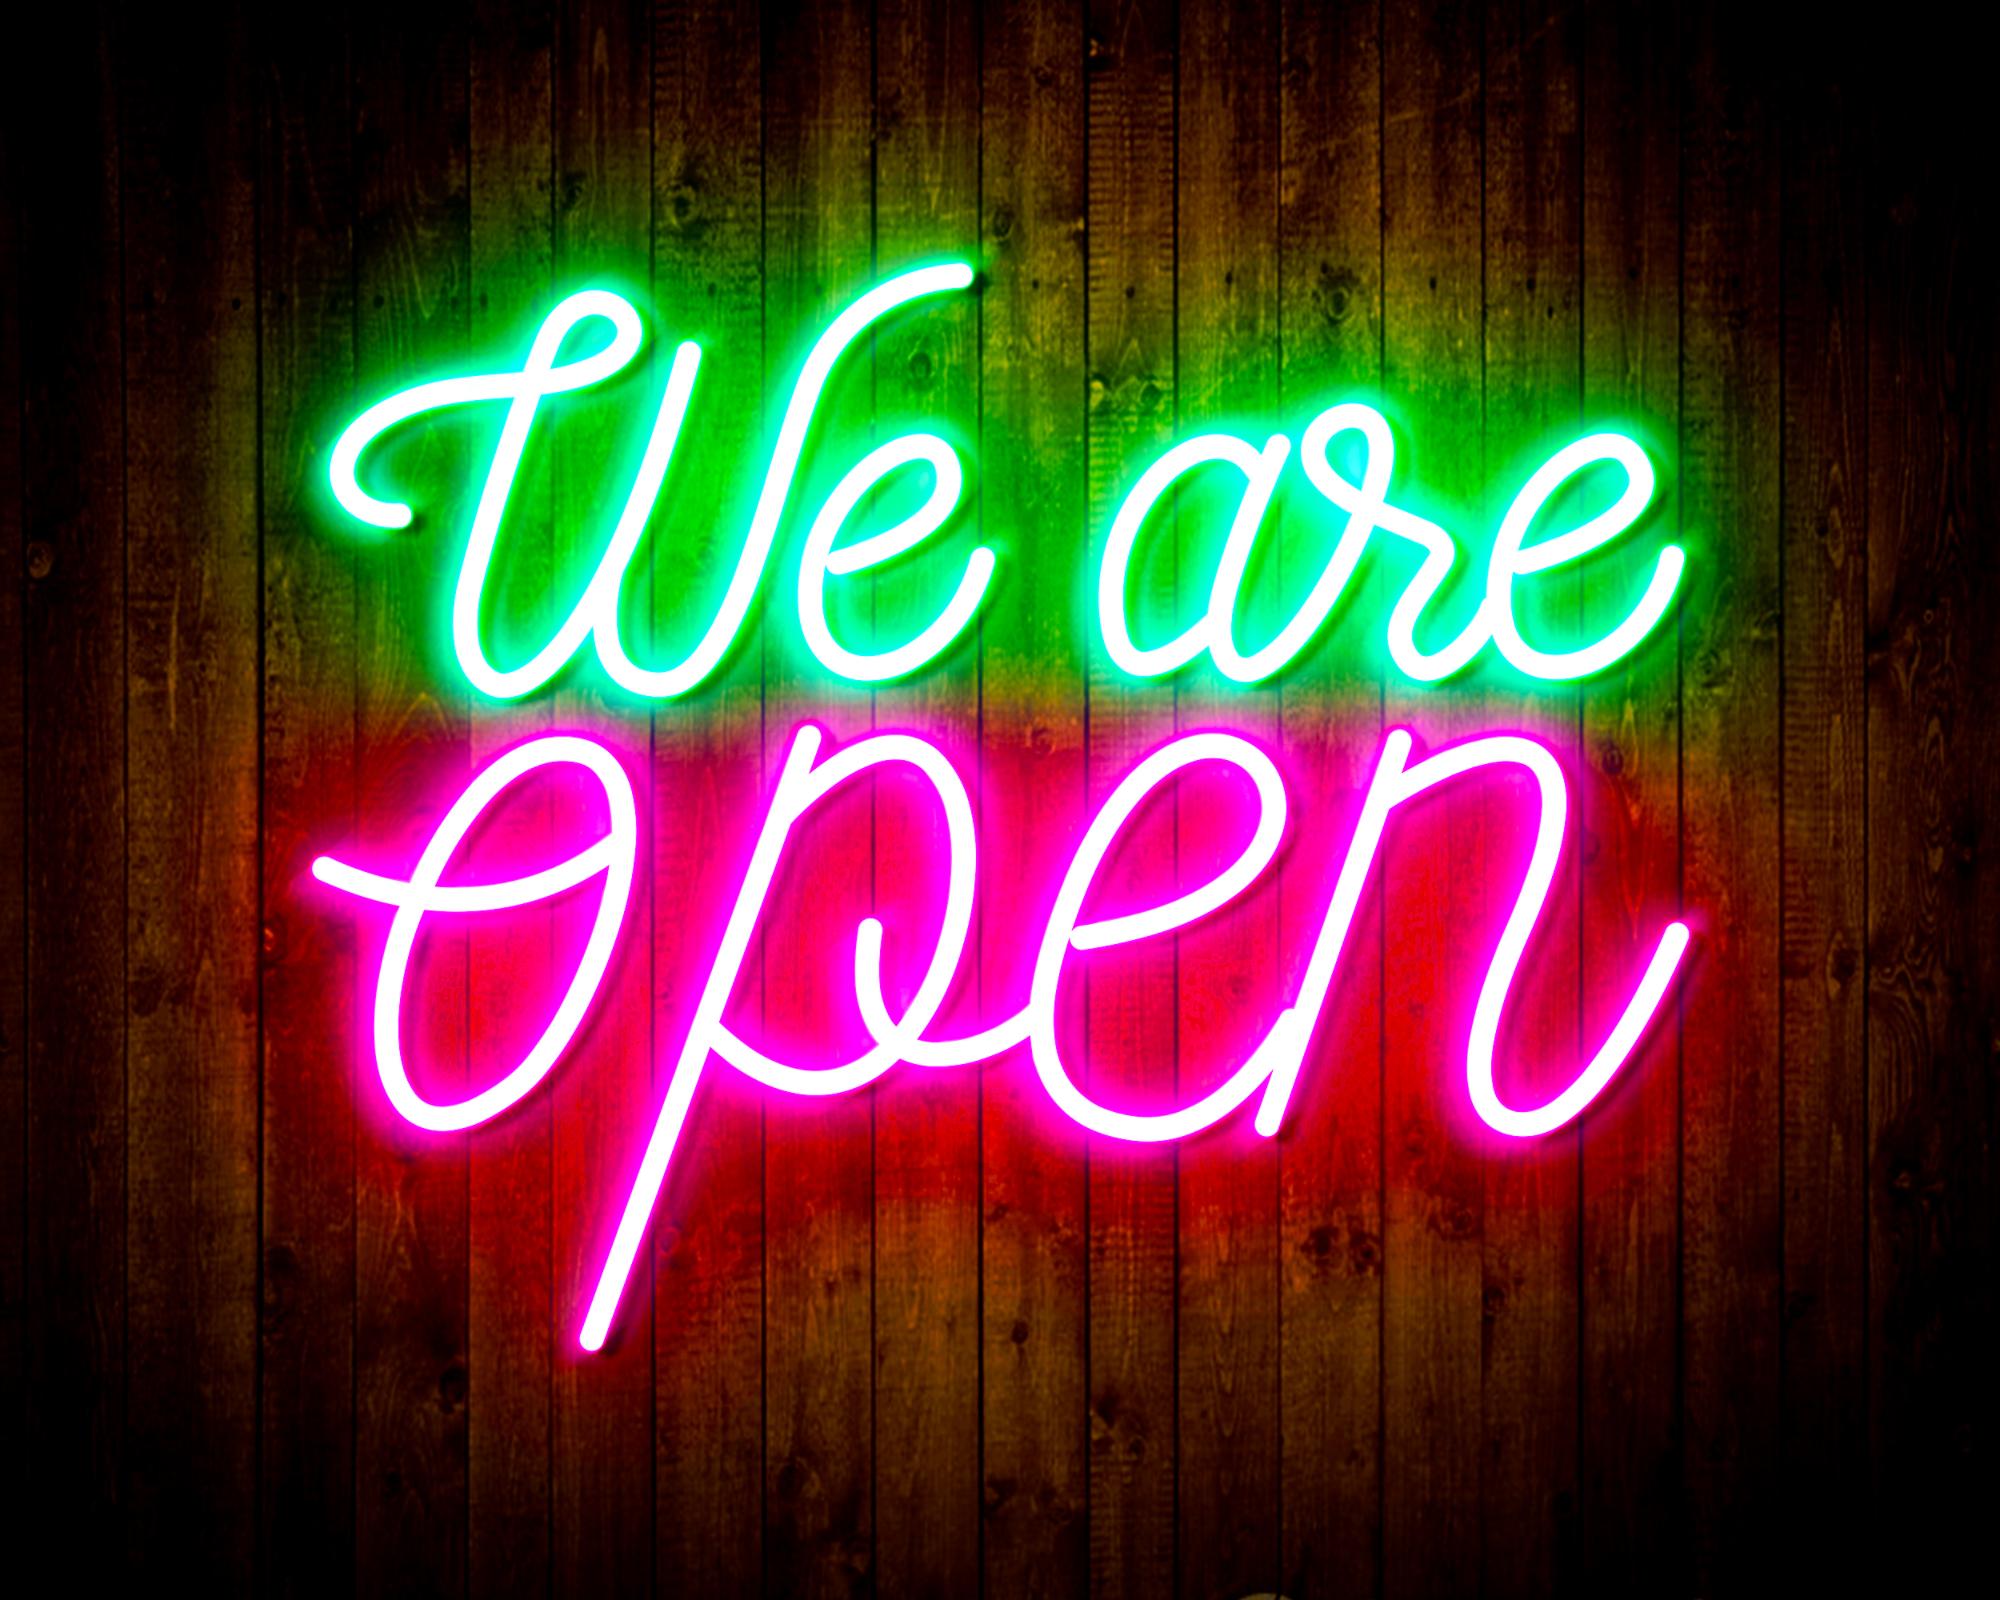 We 're Open LED Neon Sign Wall Light